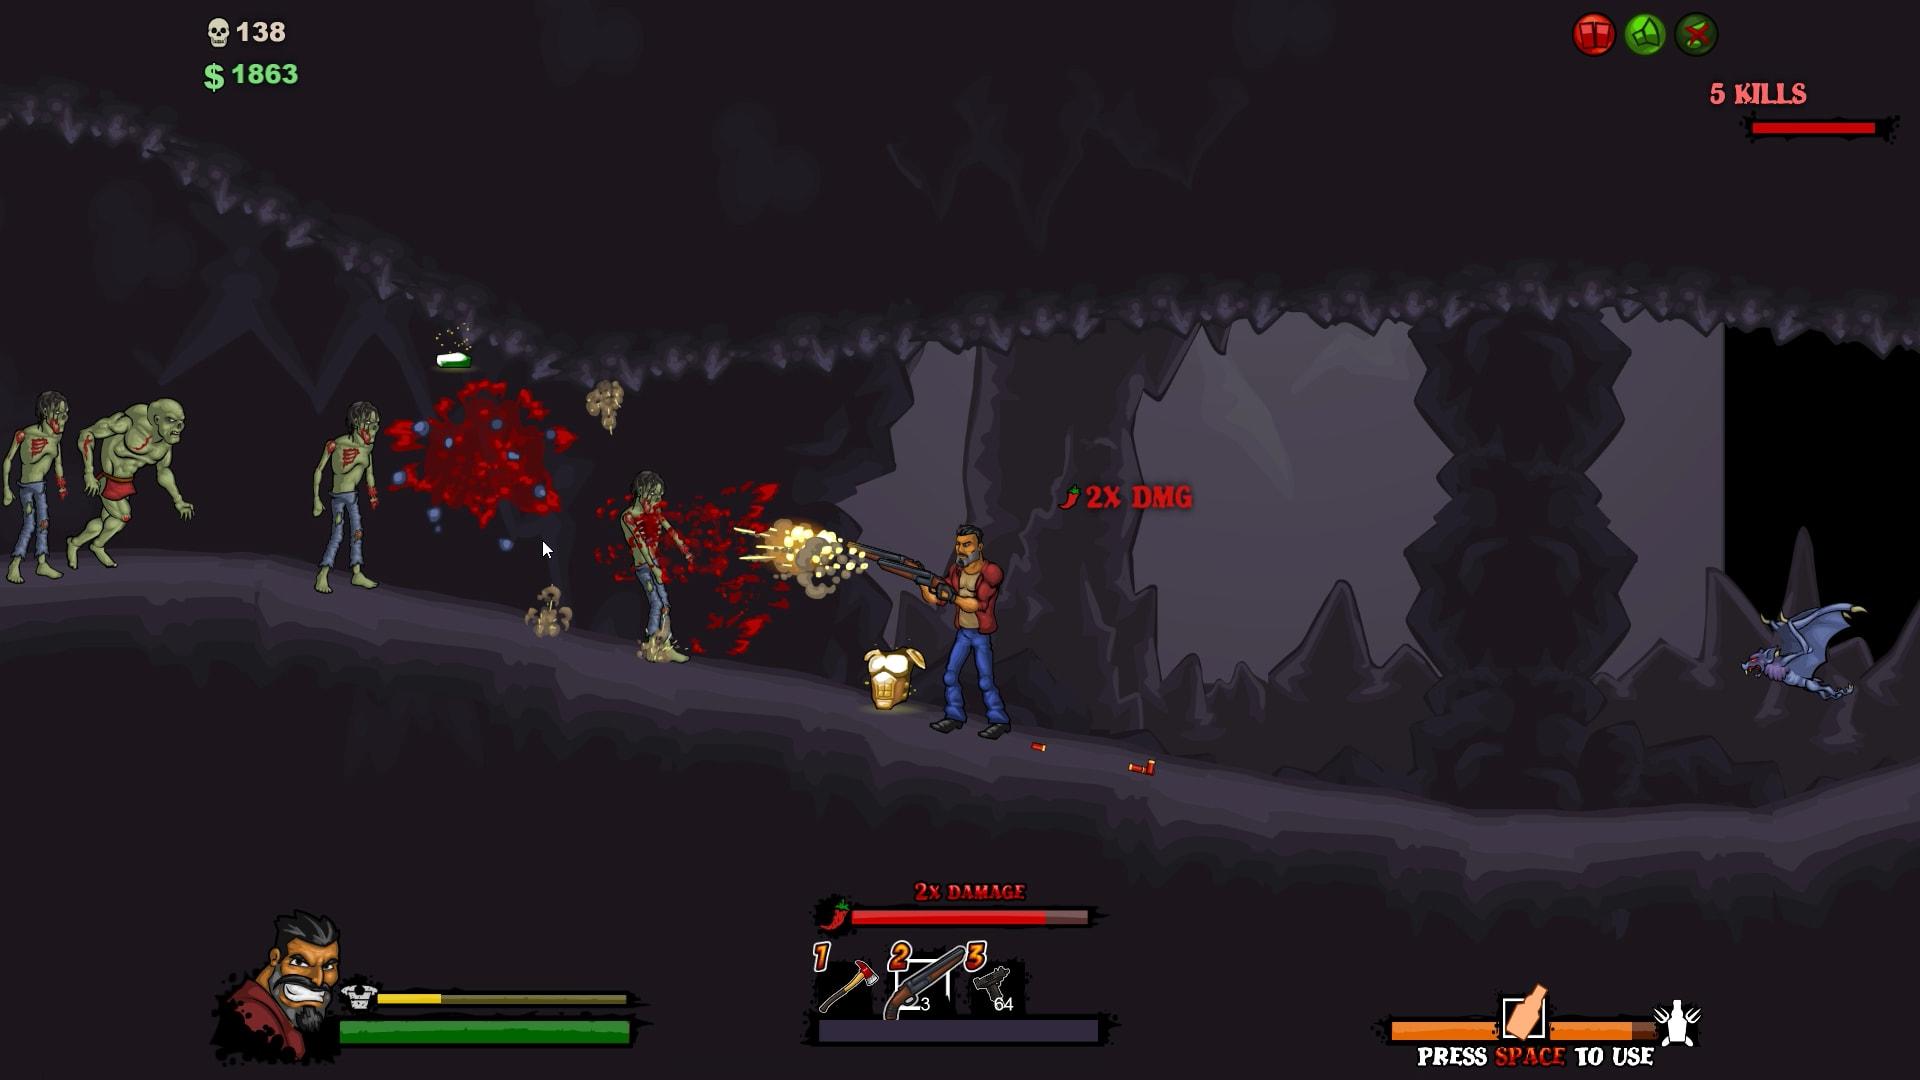 Screenshot №1 from game Tequila Zombies 3